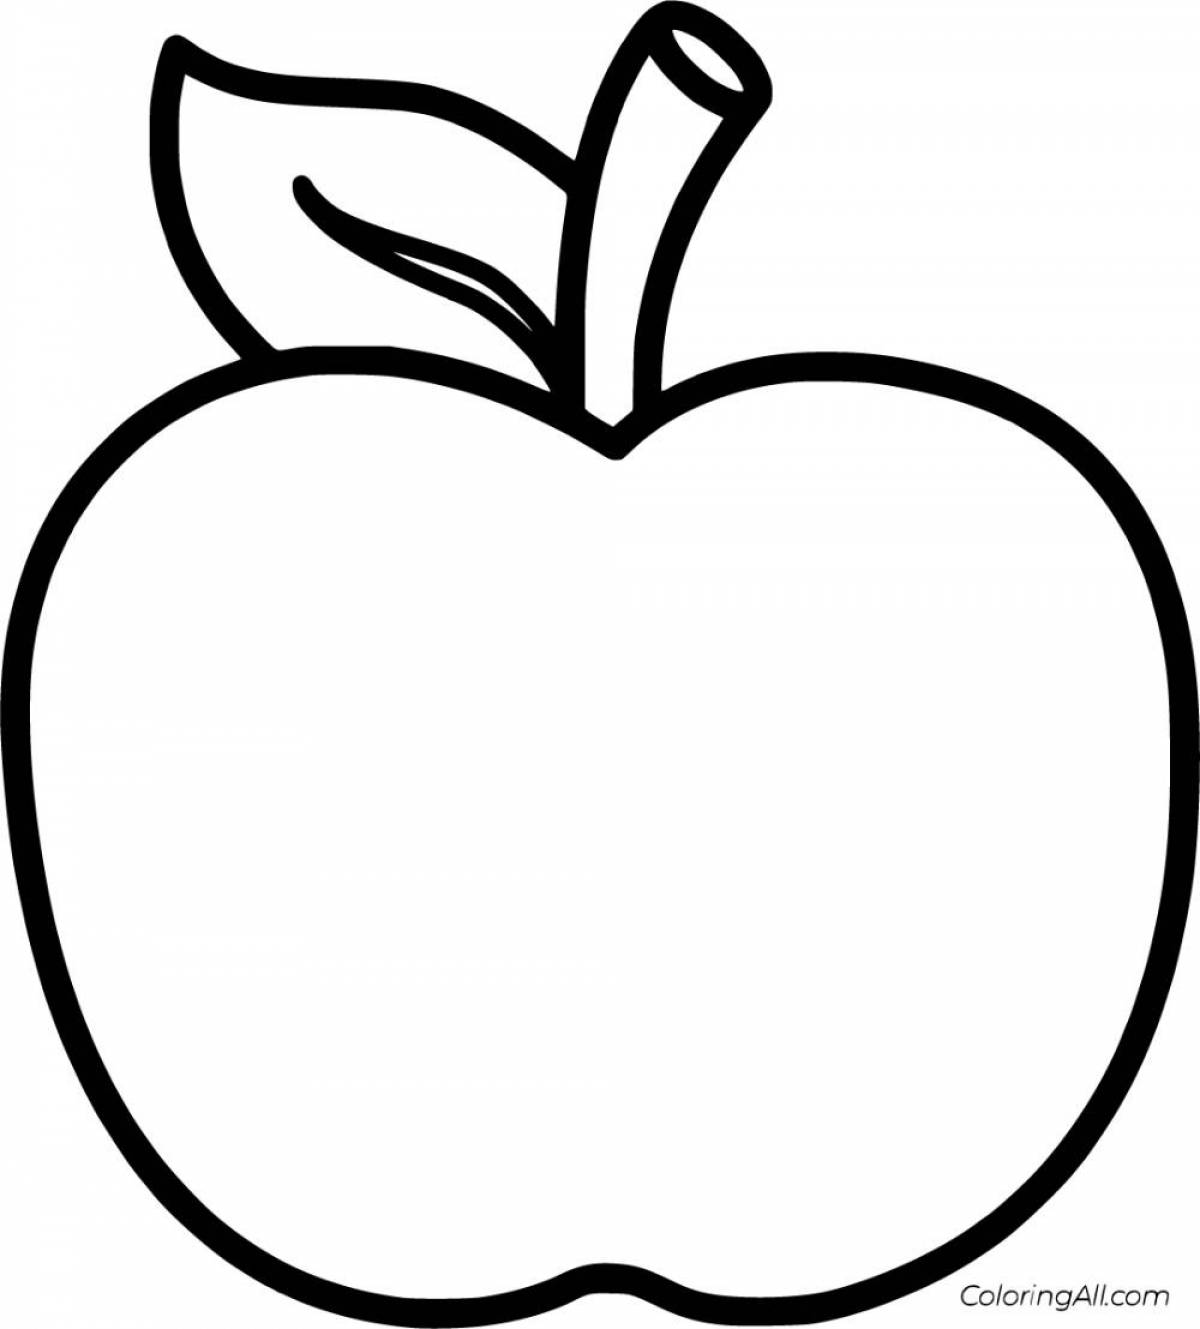 Coloring book shimmering apple for babies